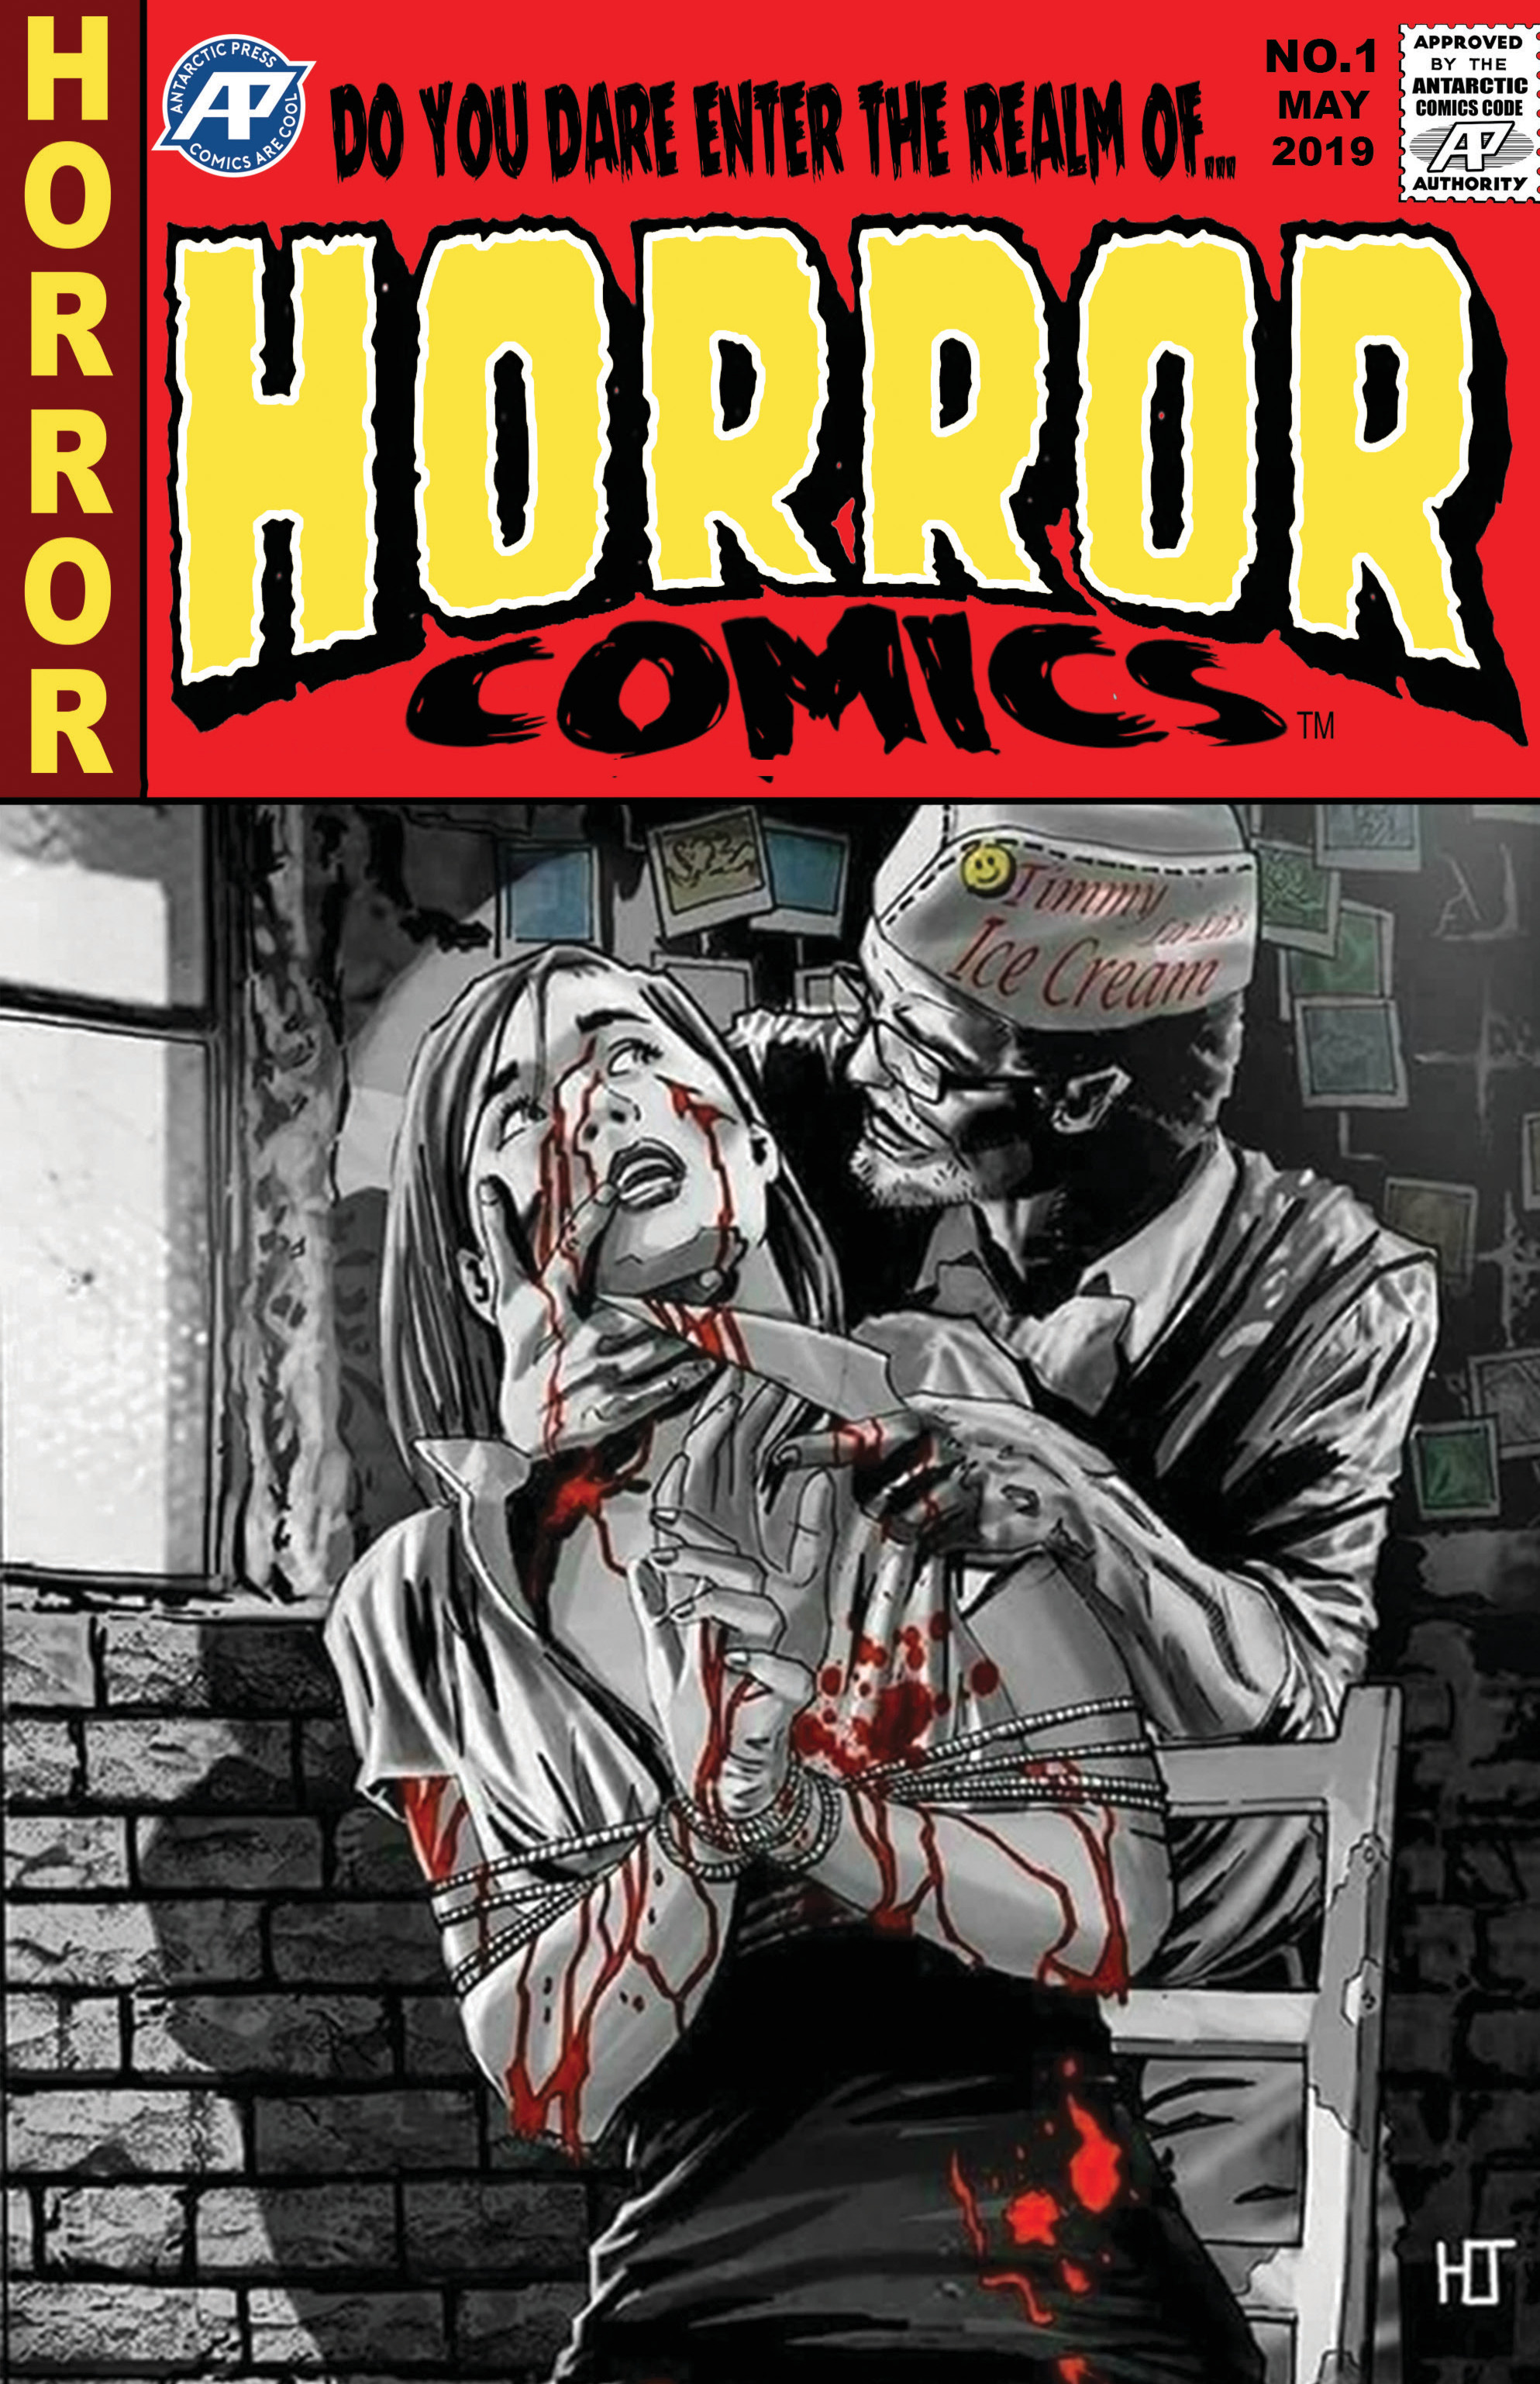 Horror Comics (2019) Chapter 1 - Page 1